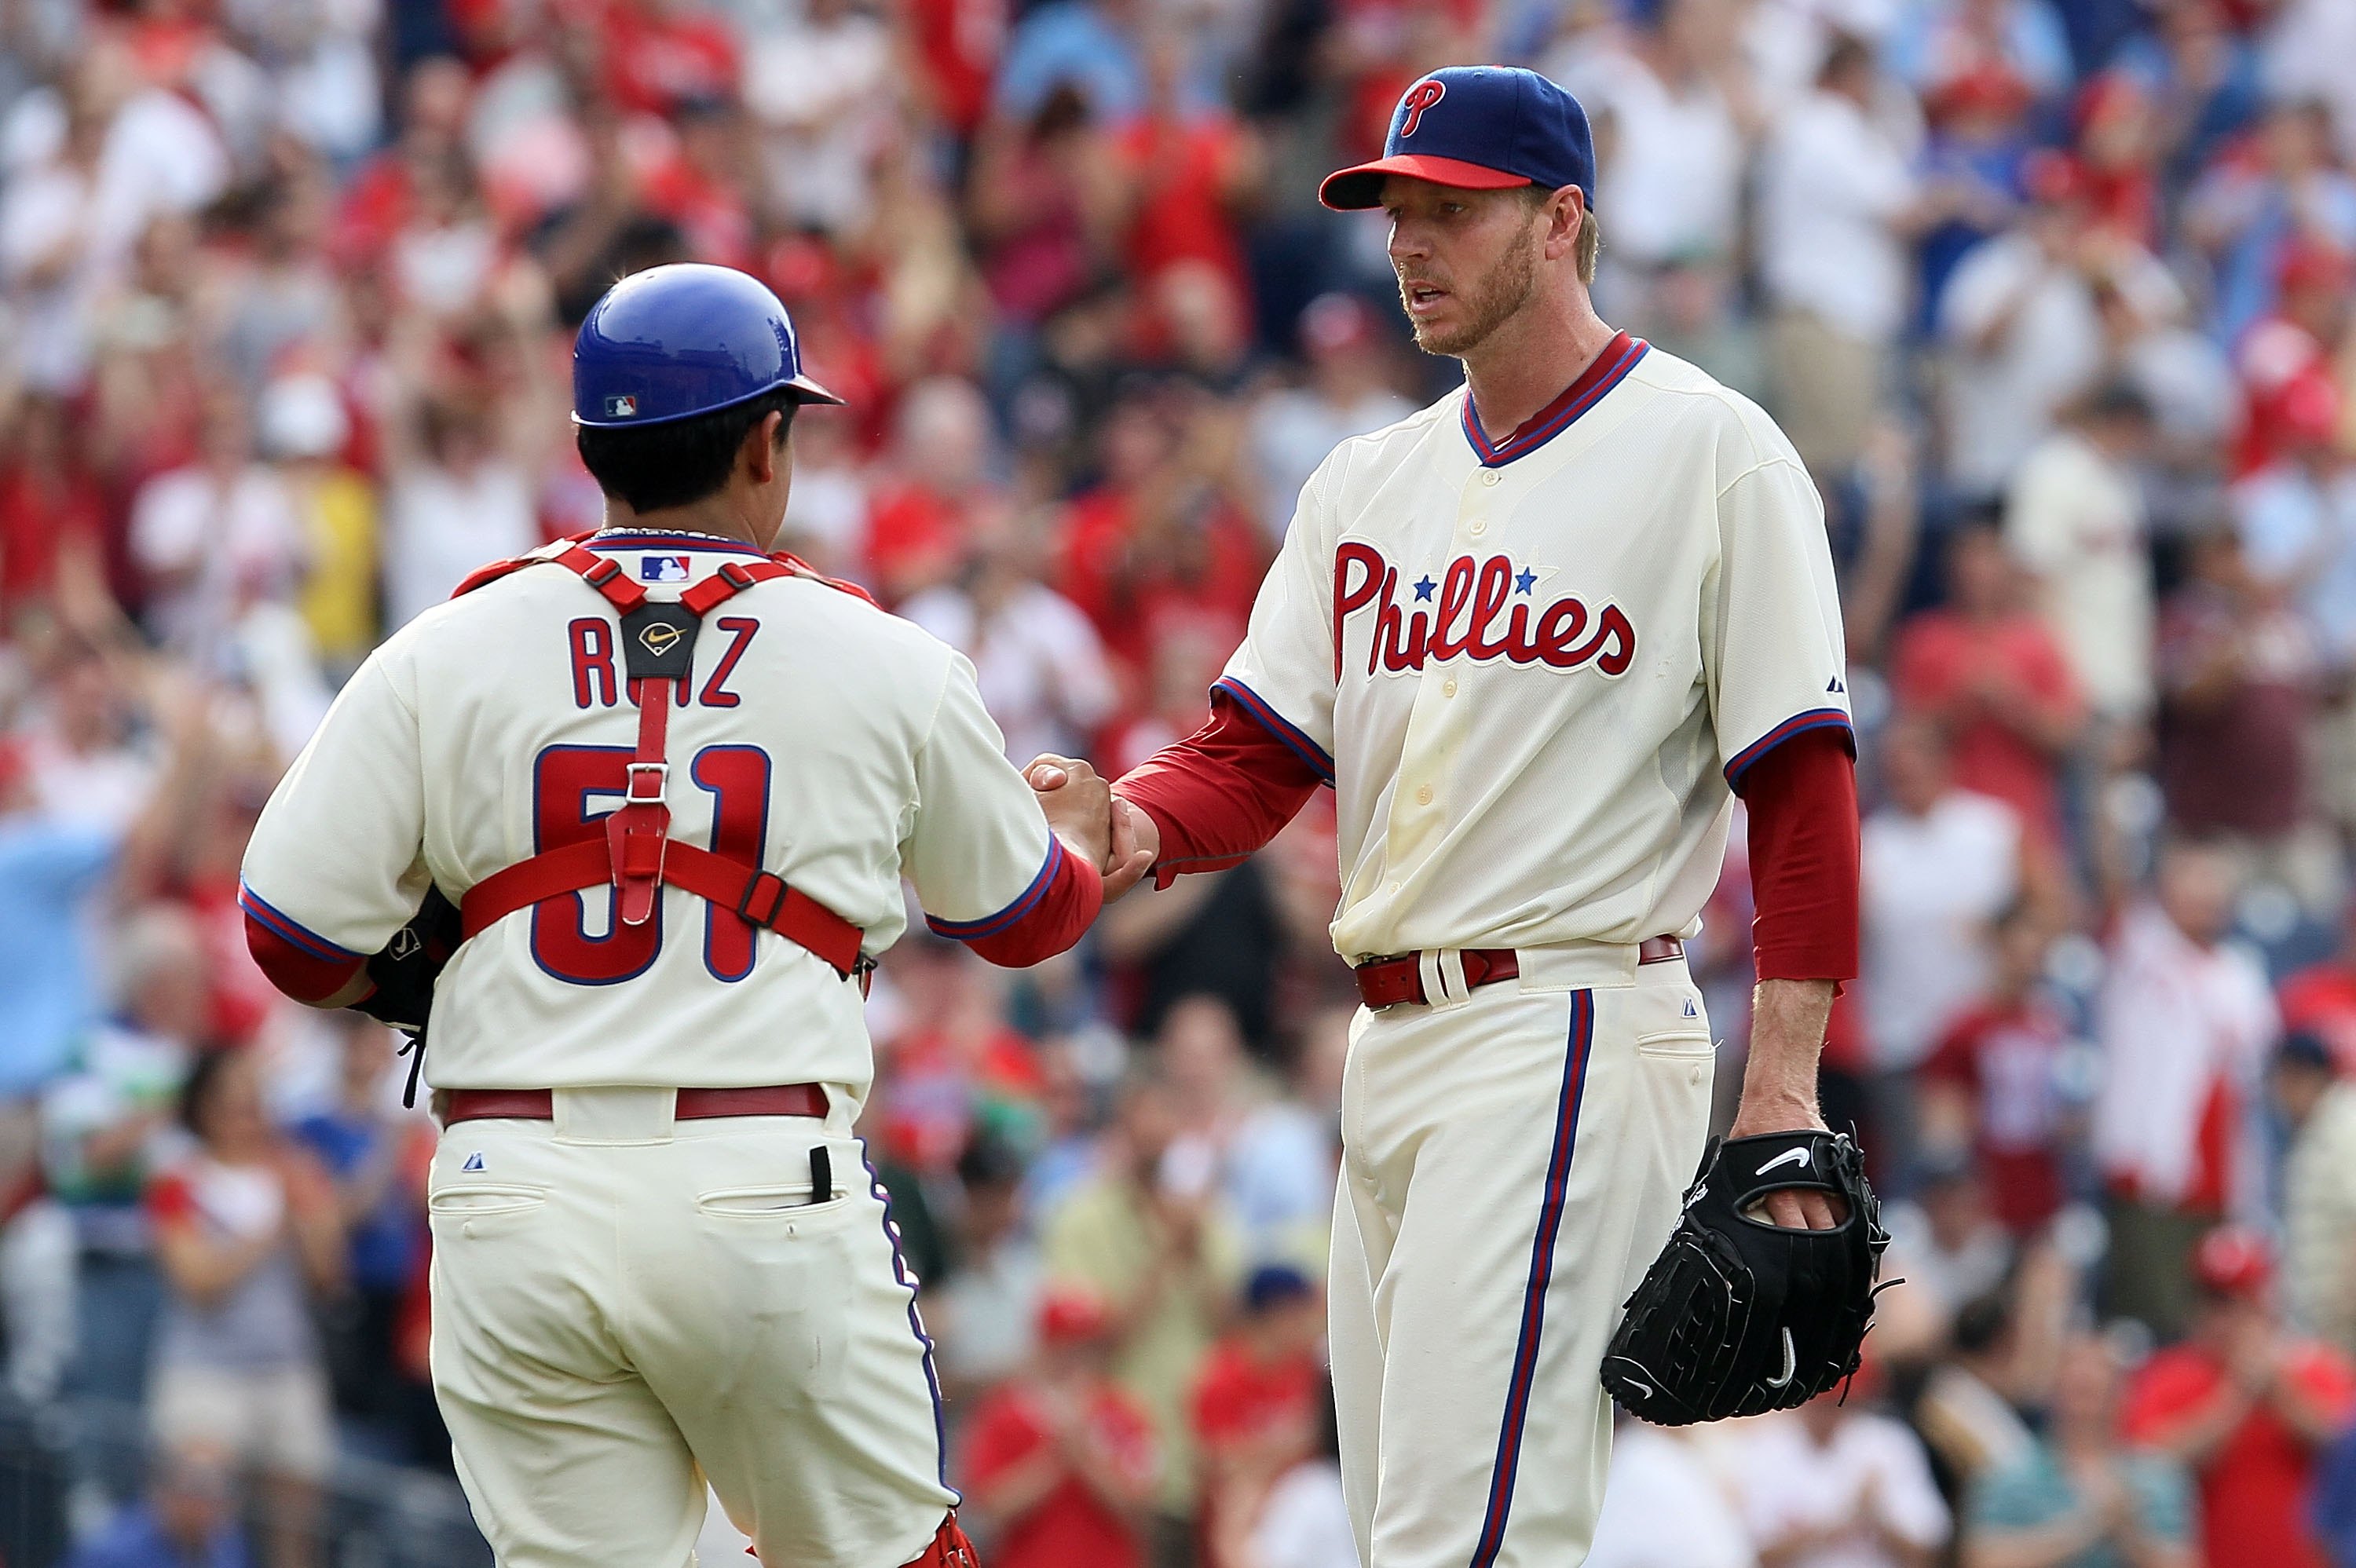 PHILADELPHIA - MAY 01:  Roy Halladay #34 and Carlos Ruiz #51 of the Philadelphia Phillies celebrate after defeating the New York Mets at Citizens Bank Park on May 1, 2010 in Philadelphia, Pennsylvania.  (Photo by Jim McIsaac/Getty Images)